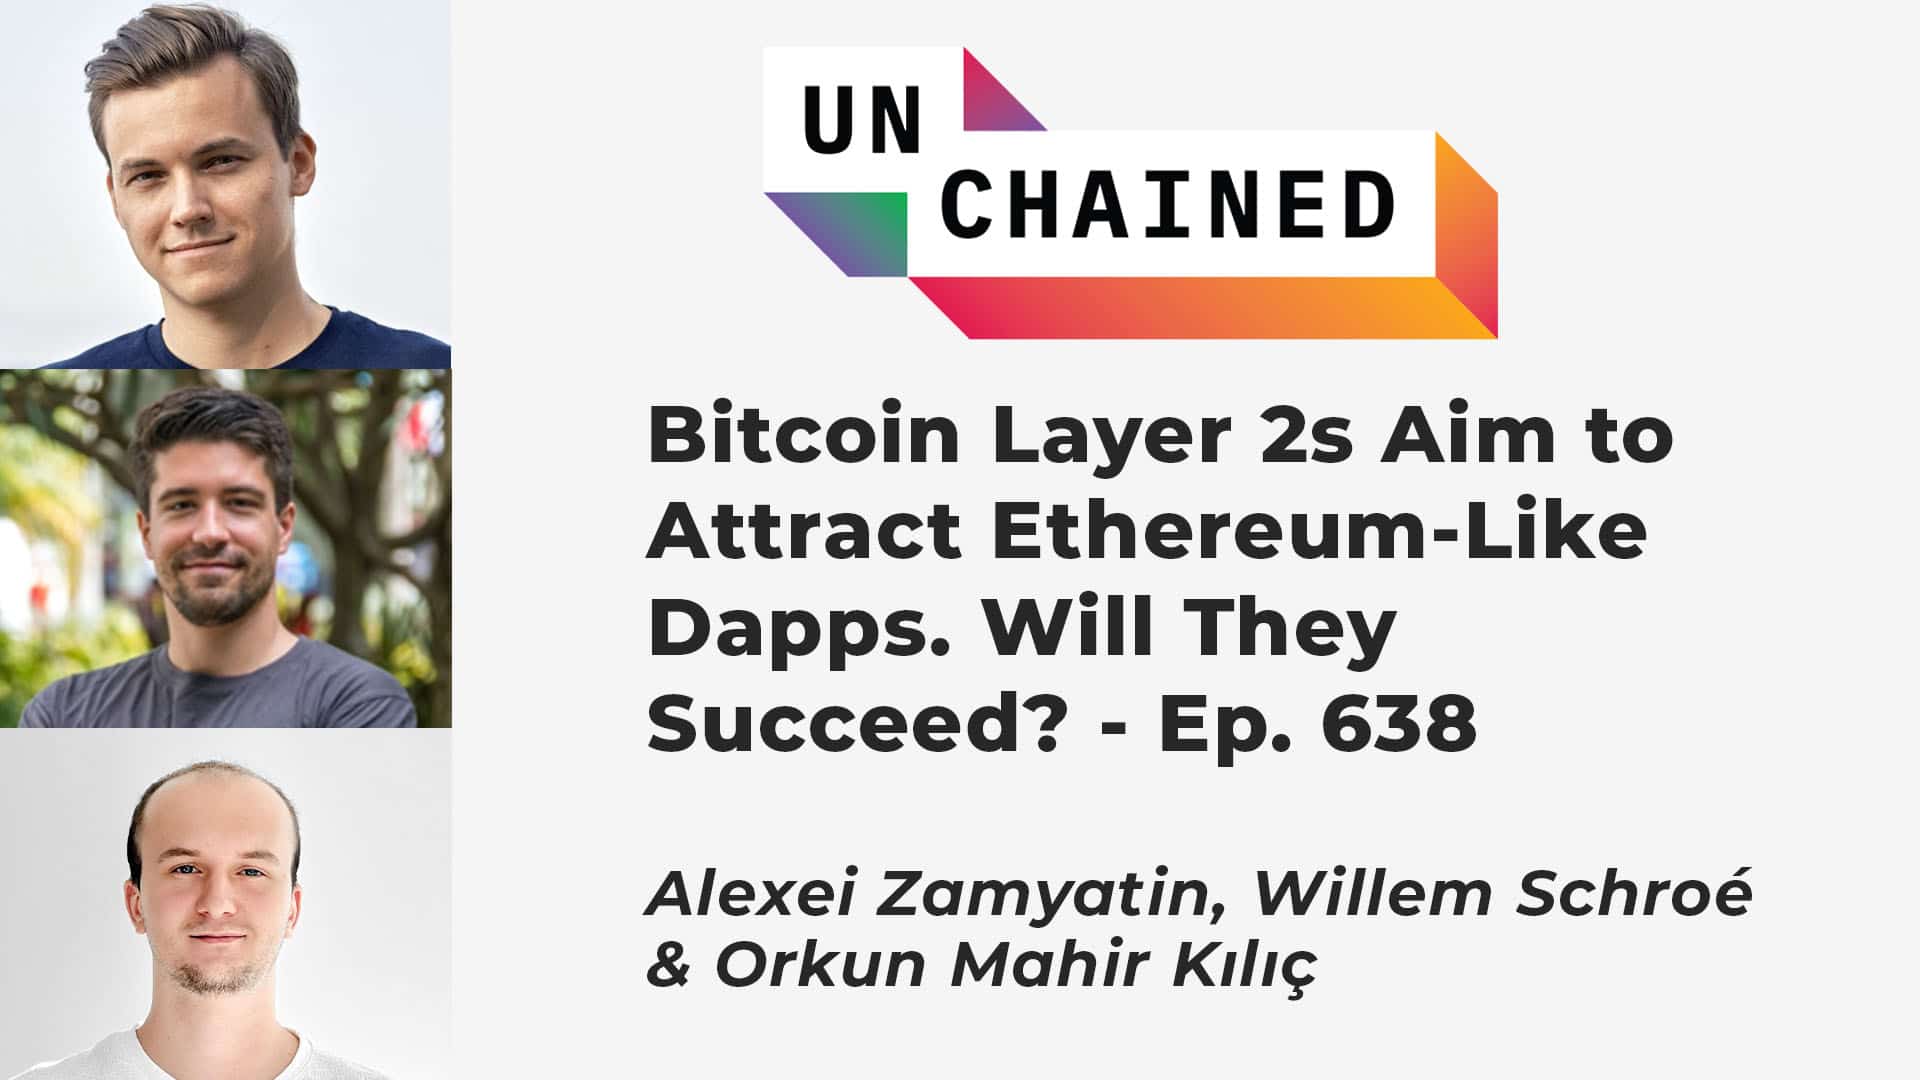 Bitcoin Layer 2s Aim to Attract Ethereum-Like Dapps. Will They Succeed? - Ep.638